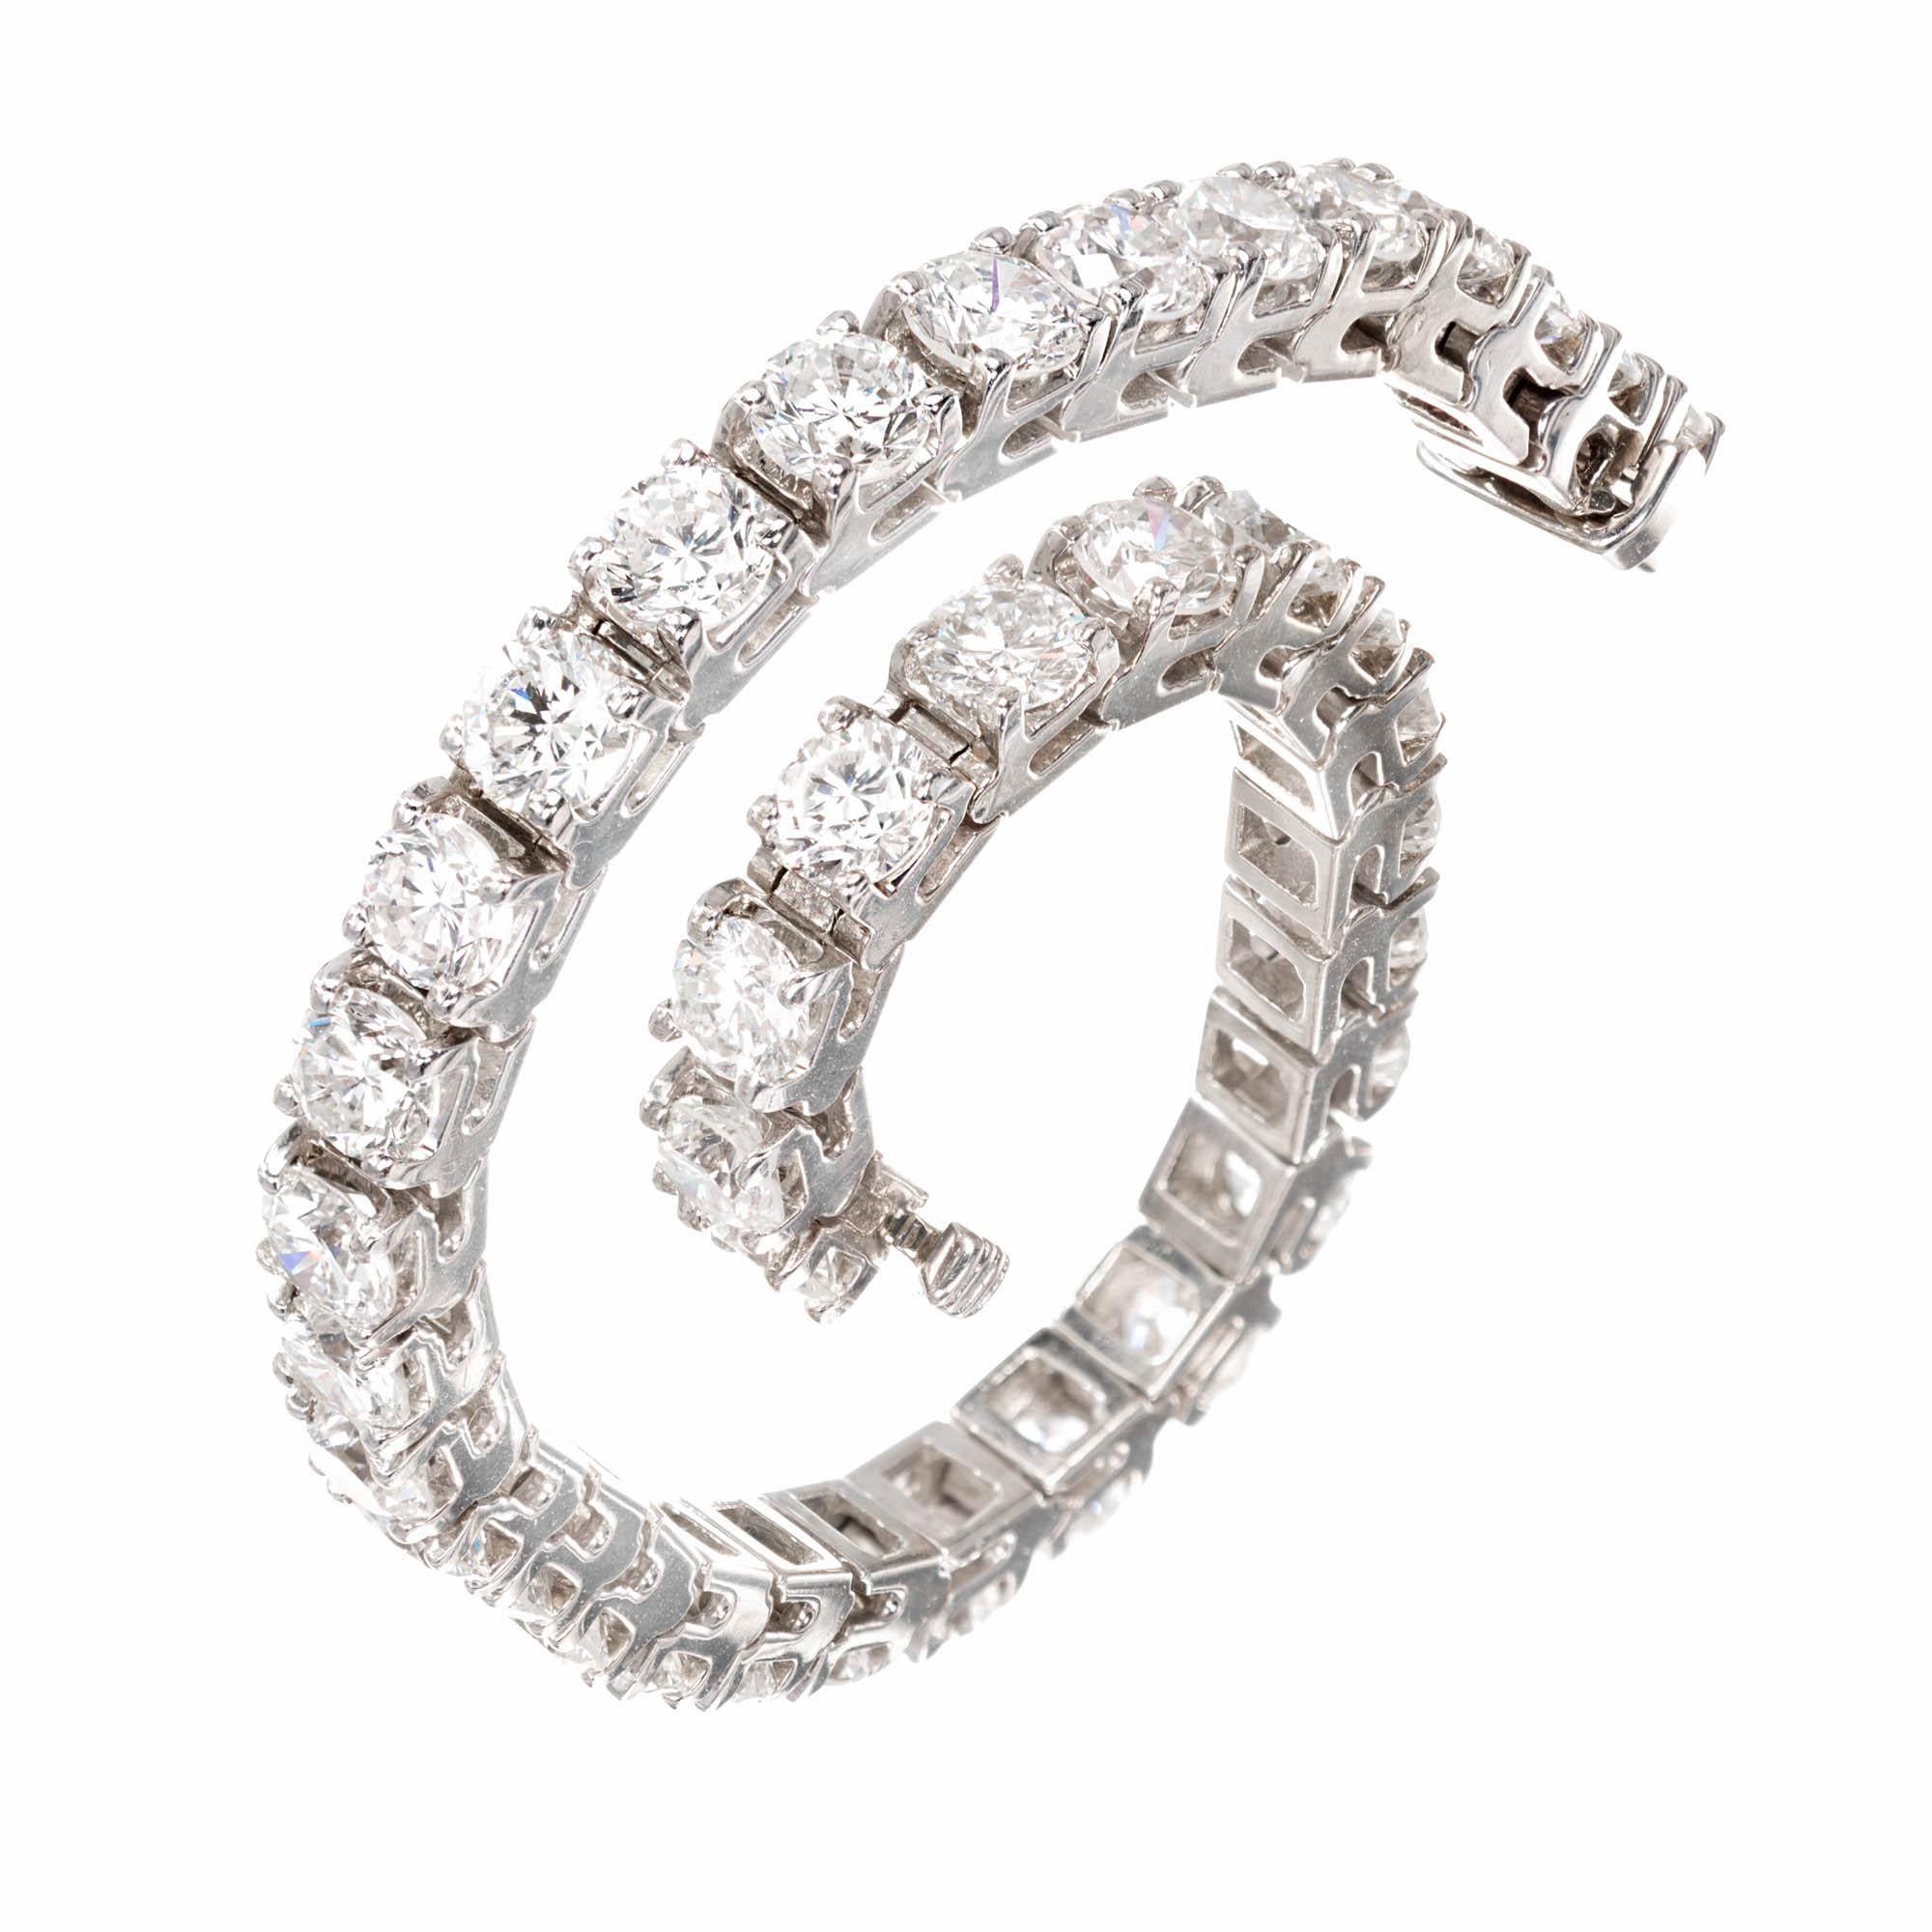  Peter Suchy hinged link brilliant cut Diamond tennis bracelet with 11.00ct of bright white sparkly Diamonds. 14k white gold bracelet with built in hidden catch and underside safety. 

38 round brilliant cut Diamonds, approx. total weight 11.00cts,